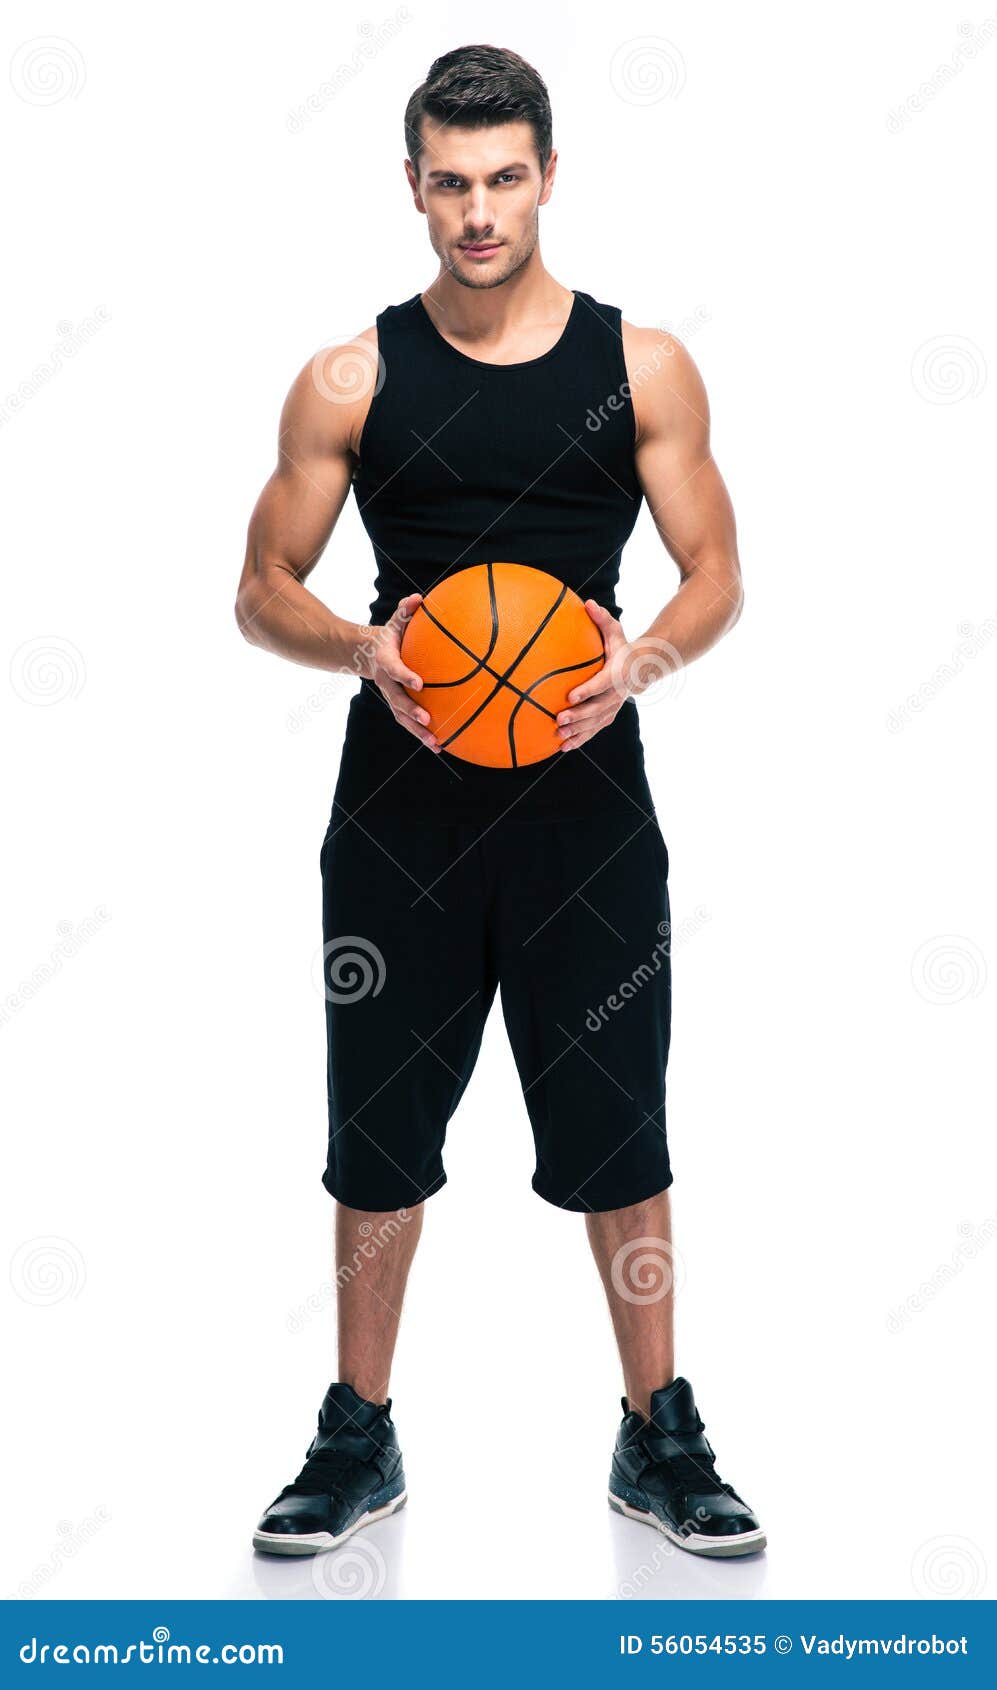 Handsome Basketball Player with Ball Stock Image - Image of camera ...